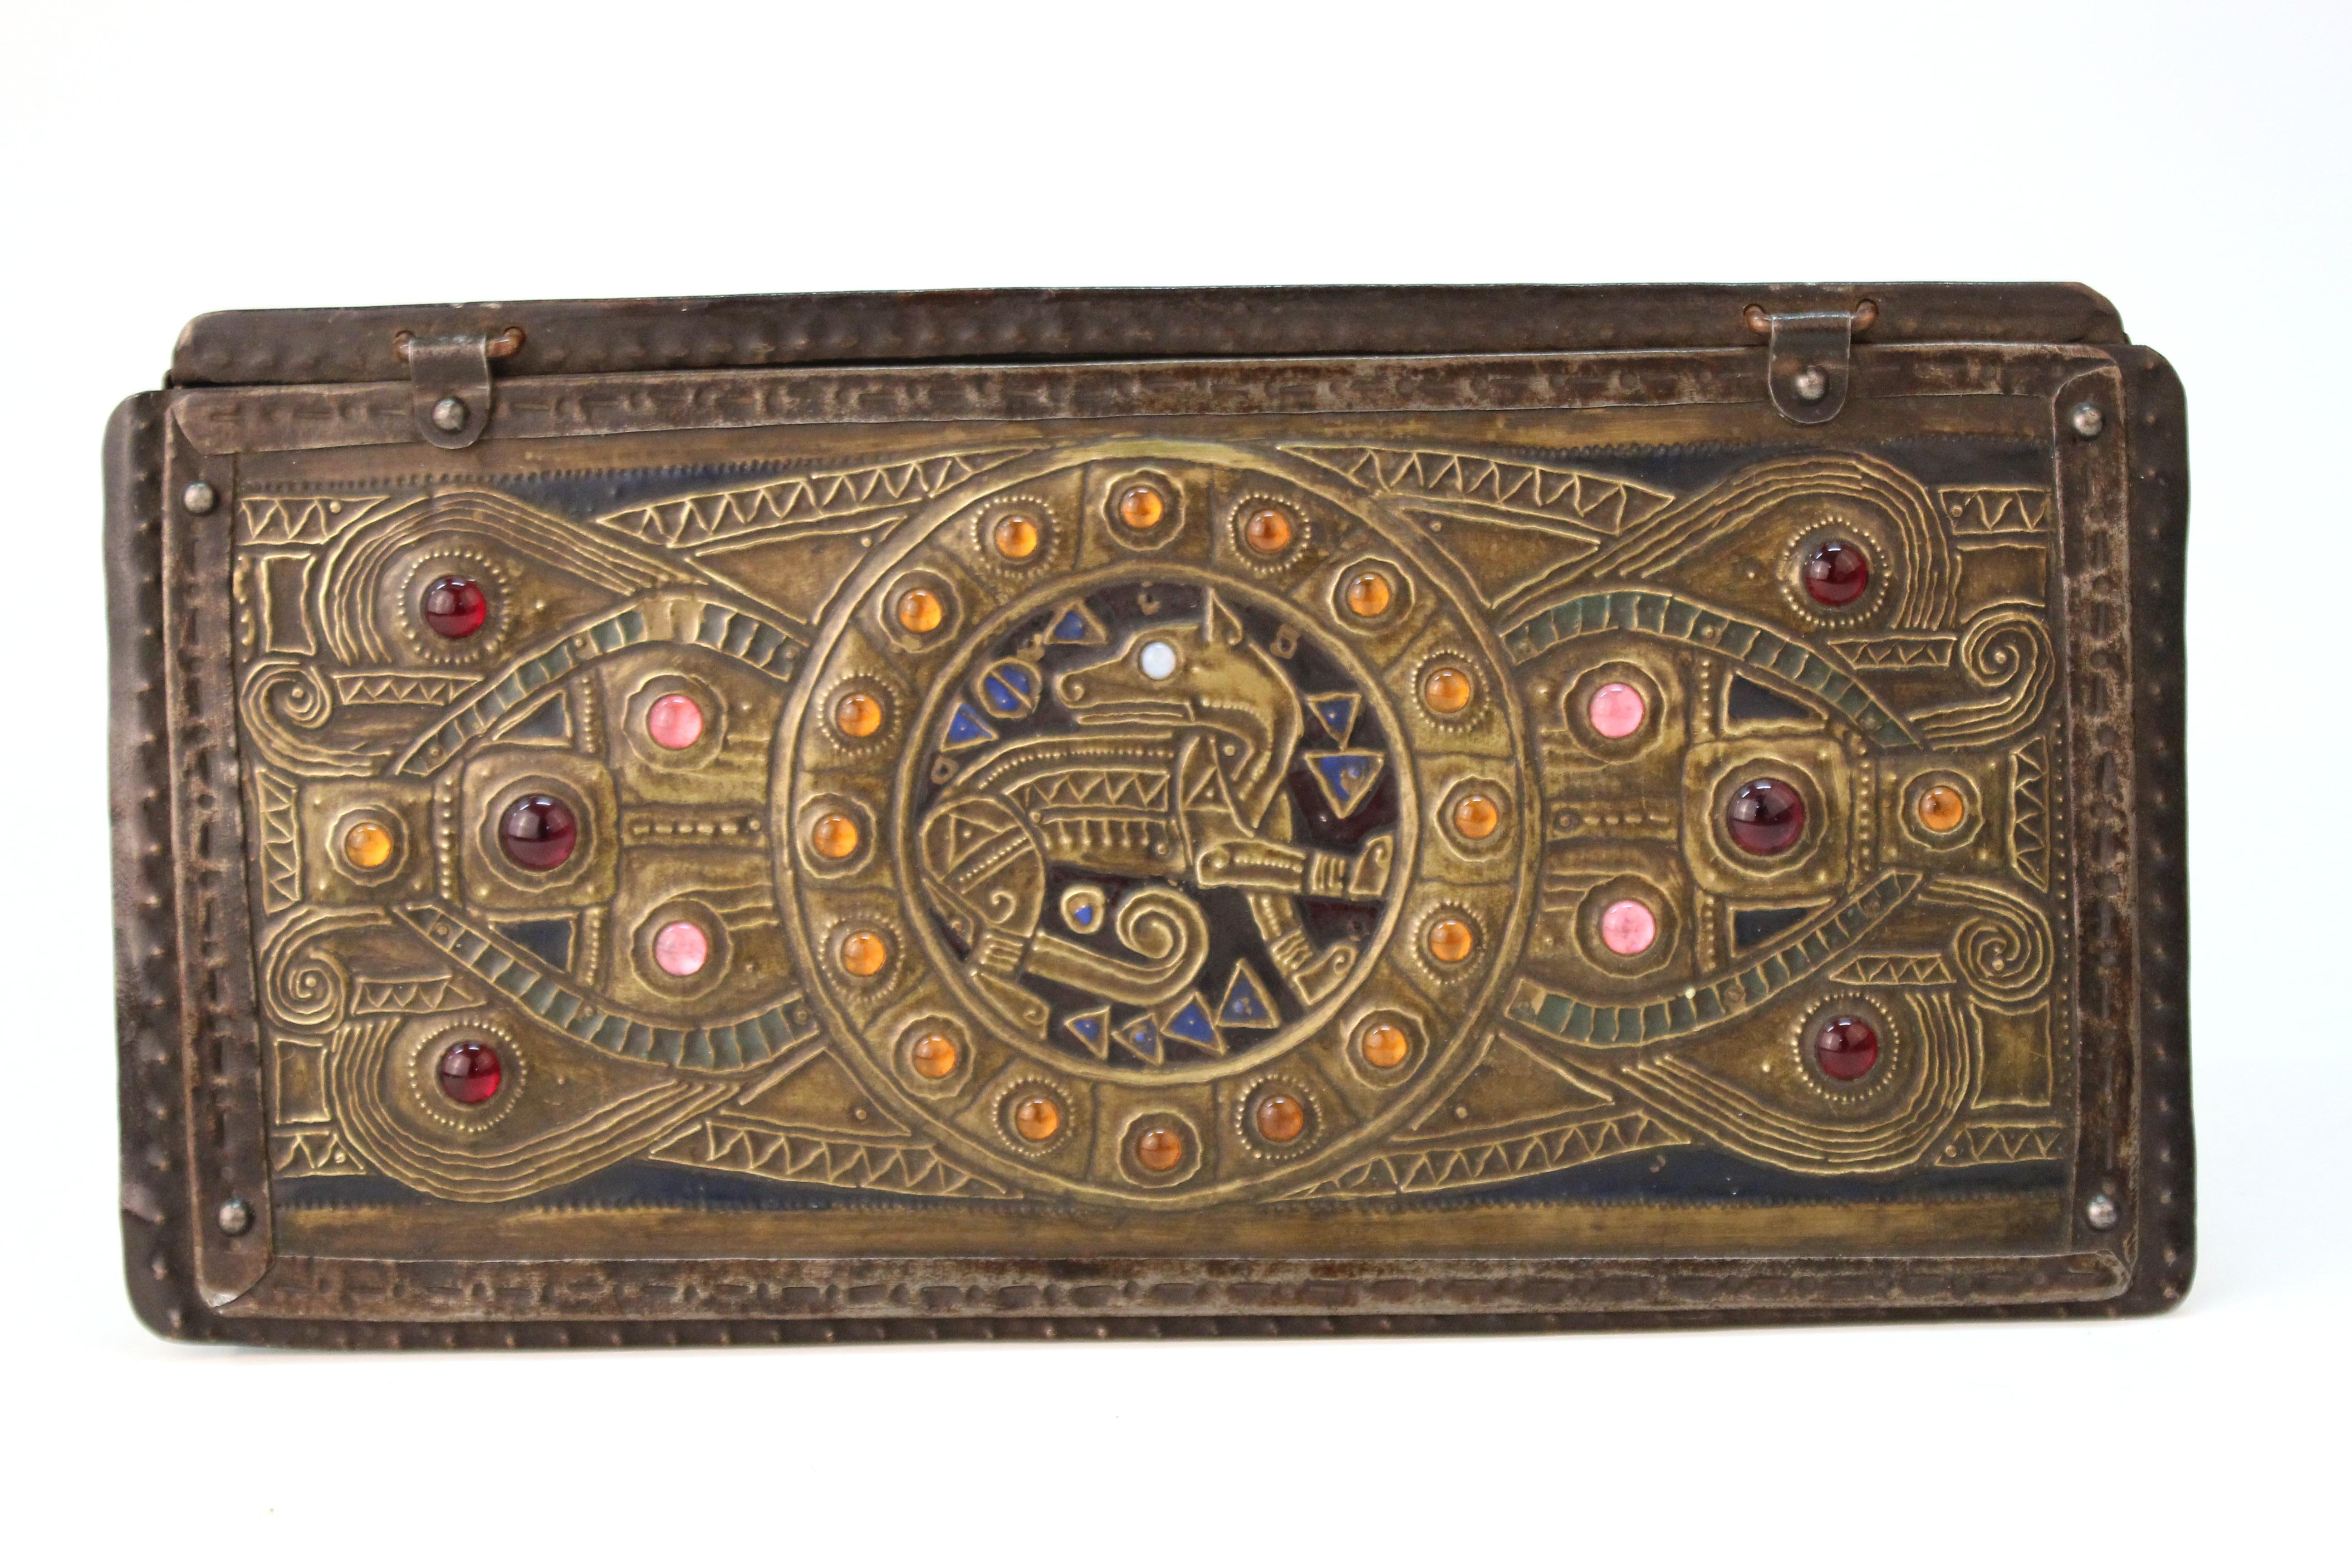 French Art Nouveau period box in metal repoussé´ panels with inserted colorful glass cabochon jewels, made by Alfred Daguet in the 1910s in Paris. The highly decorative brass lid panel has a central medallion with a dog and stylized natural motifs